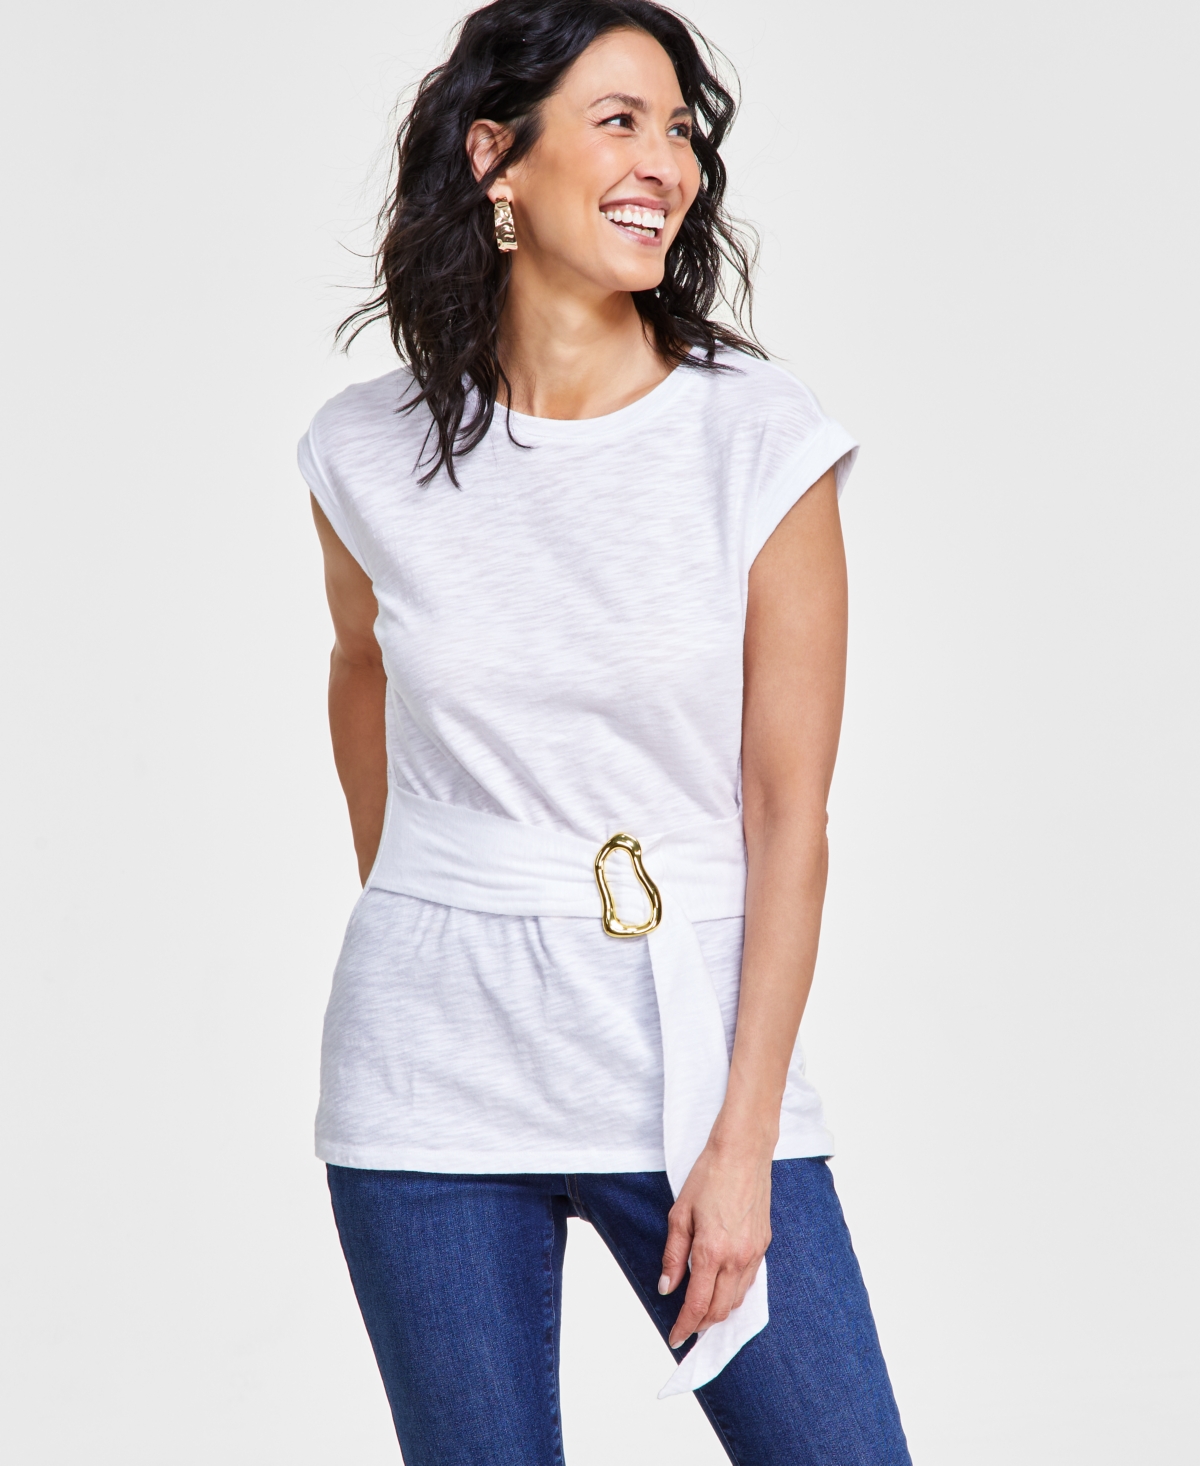 Women's Crewneck Belted Top, Created for Macy's - Jeni Bloom